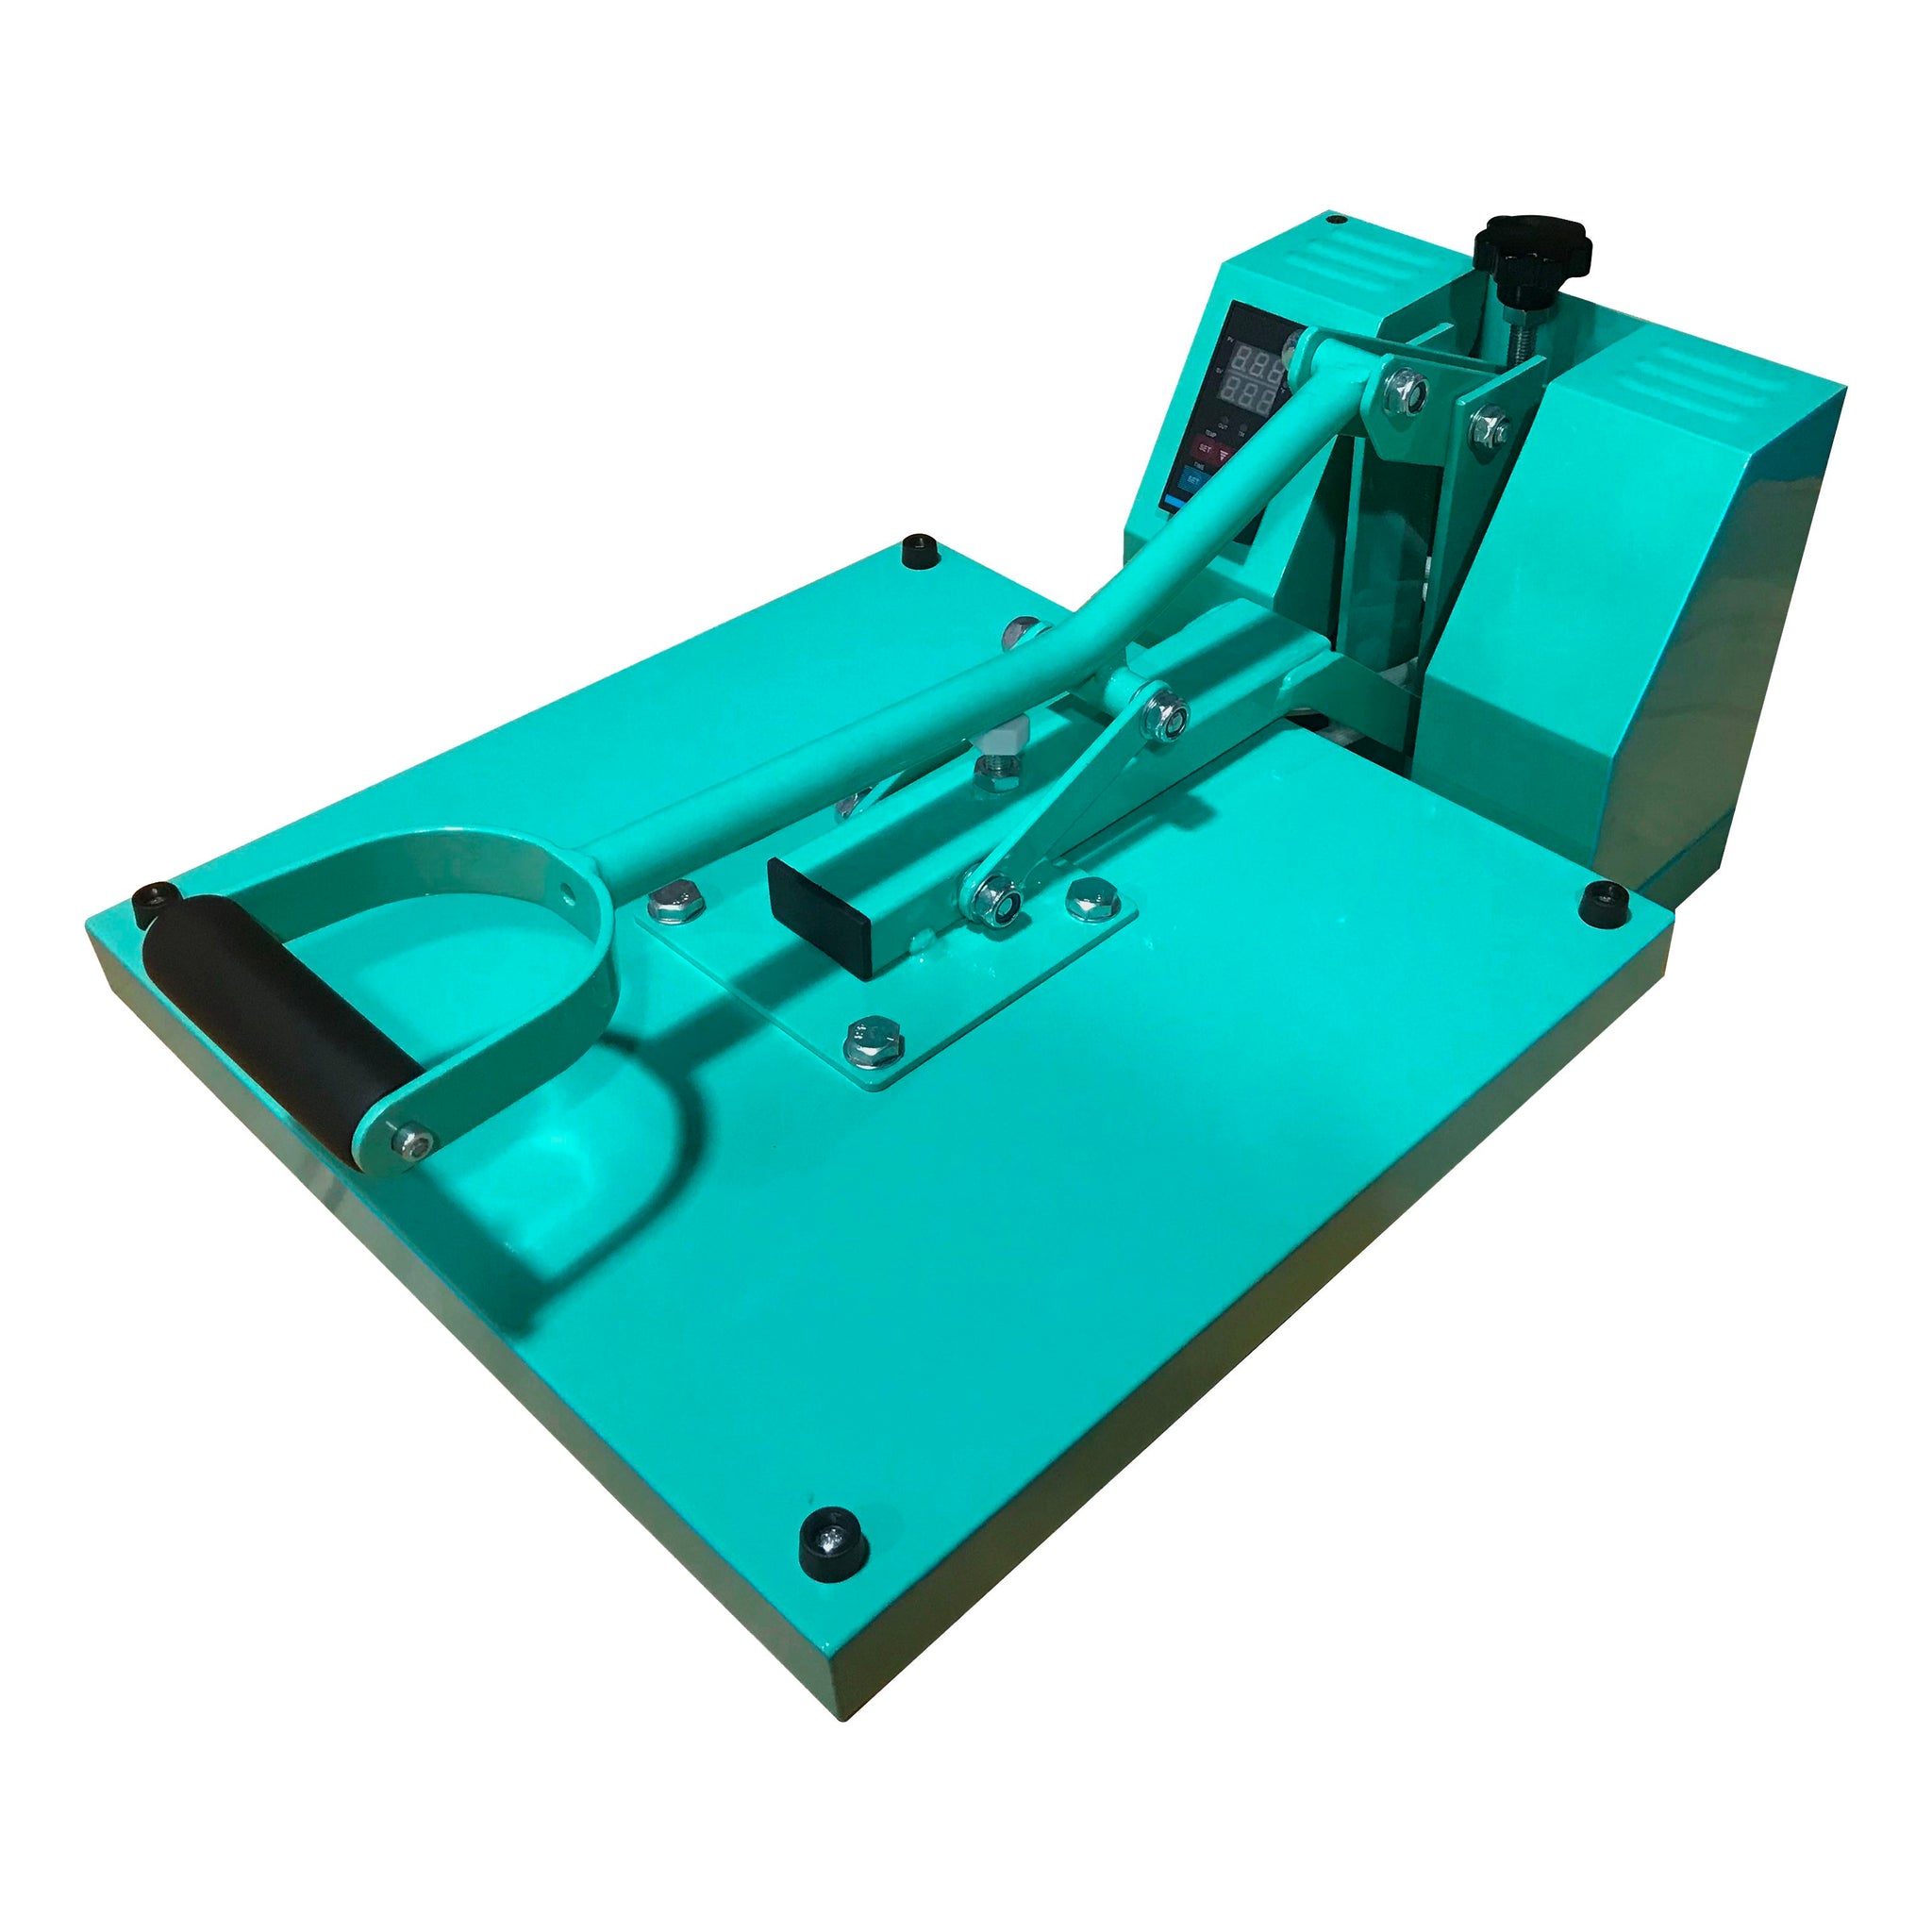 Swing Design 15 inch x 15 inch Craft Heat Press - Turquoise, Men's, Size: One Size